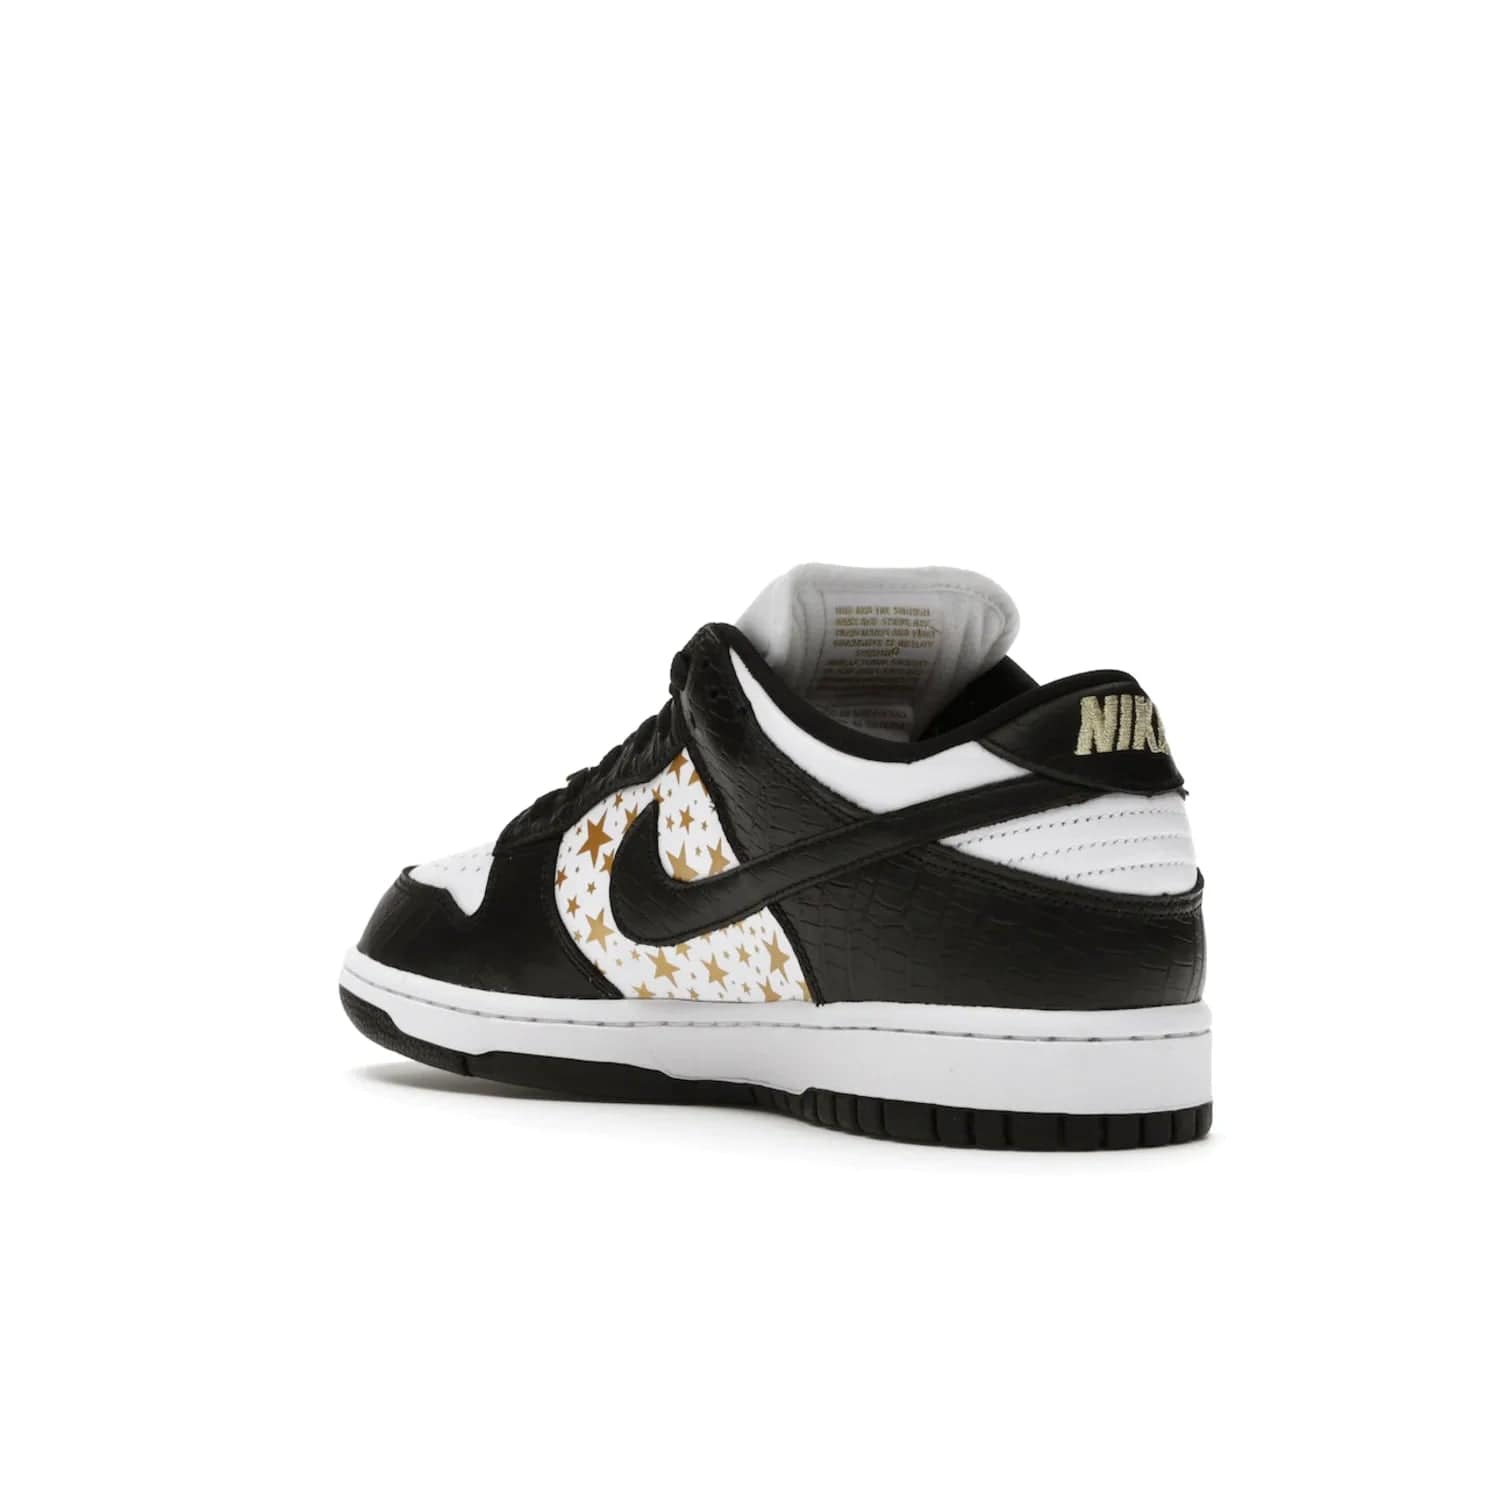 Nike SB Dunk Low Supreme Stars Black (2021) - Image 24 - Only at www.BallersClubKickz.com - Retro style and signature details make the Nike SB Dunk Low Supreme Black a must-have. This special edition shoe features a white leather upper and black croc skin overlays complemented by gold stars and deubré. Enjoy a piece of SB history and grab yours today.